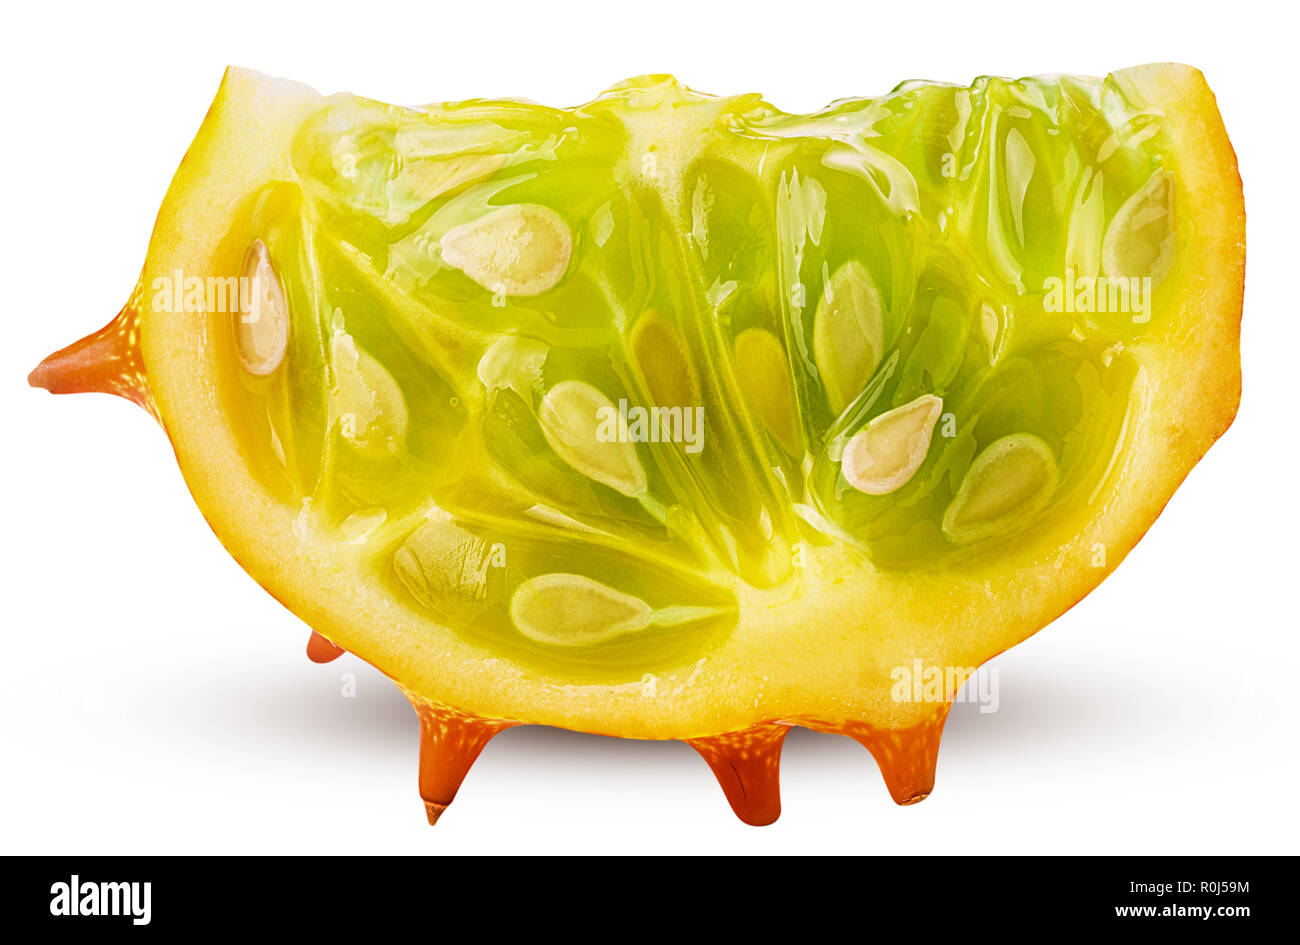 Kiwano, horned melon slice isolated on white background. Clipping Path. Full depth of field. Stock Photo